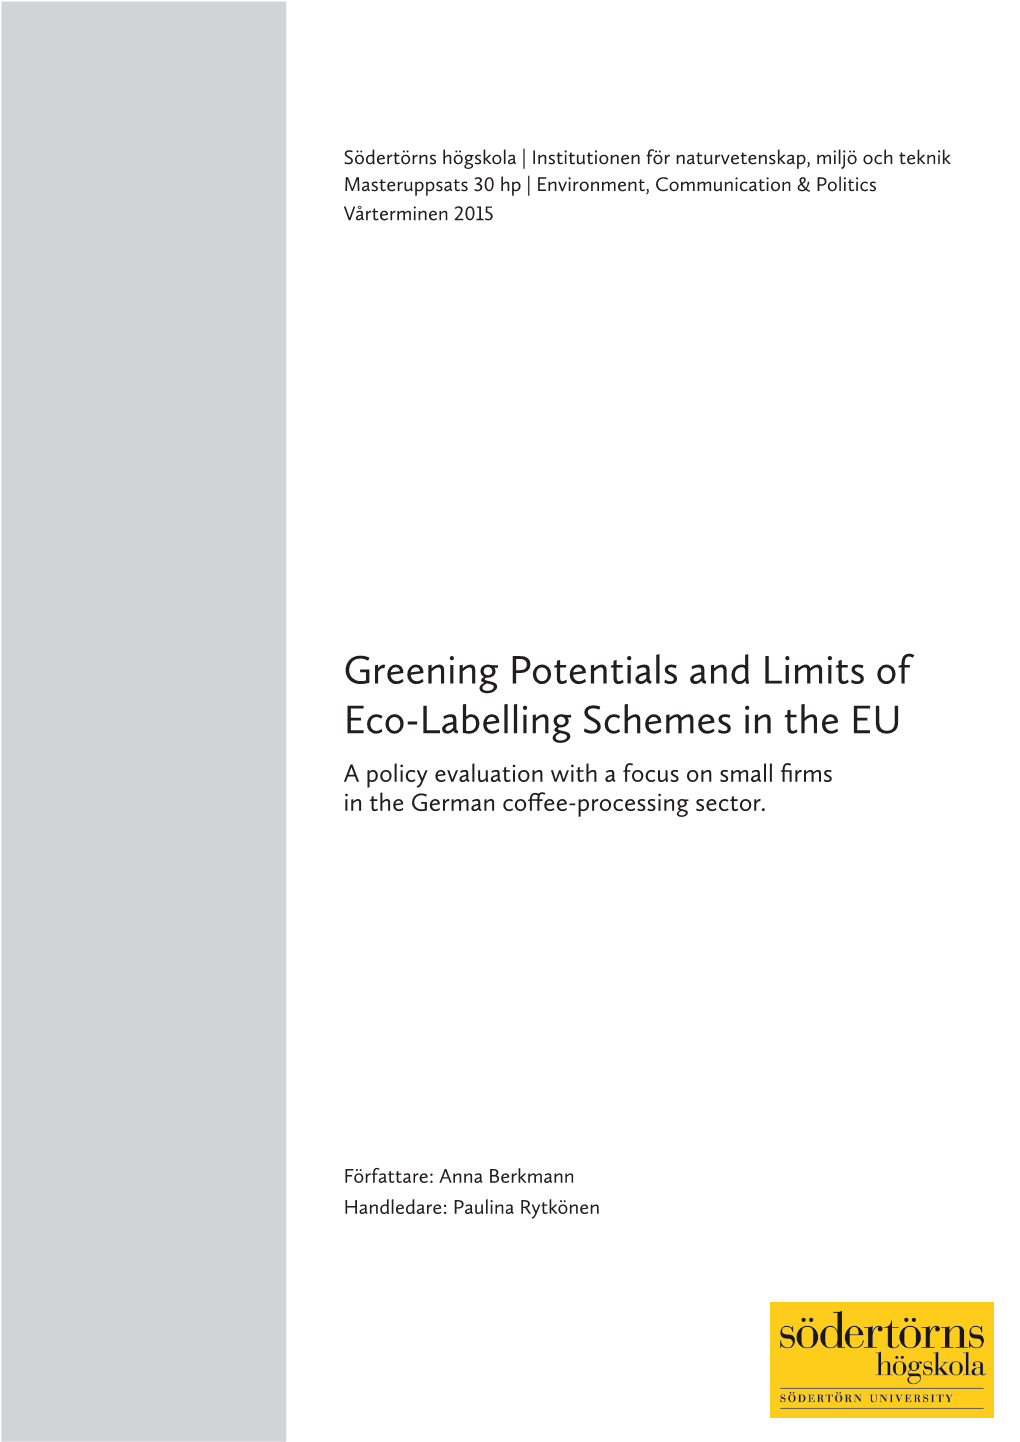 Greening Potentials and Limits of Eco-Labelling Schemes in the EU a Policy Evaluation with a Focus on Small Firms in the German Coffee-Processing Sector